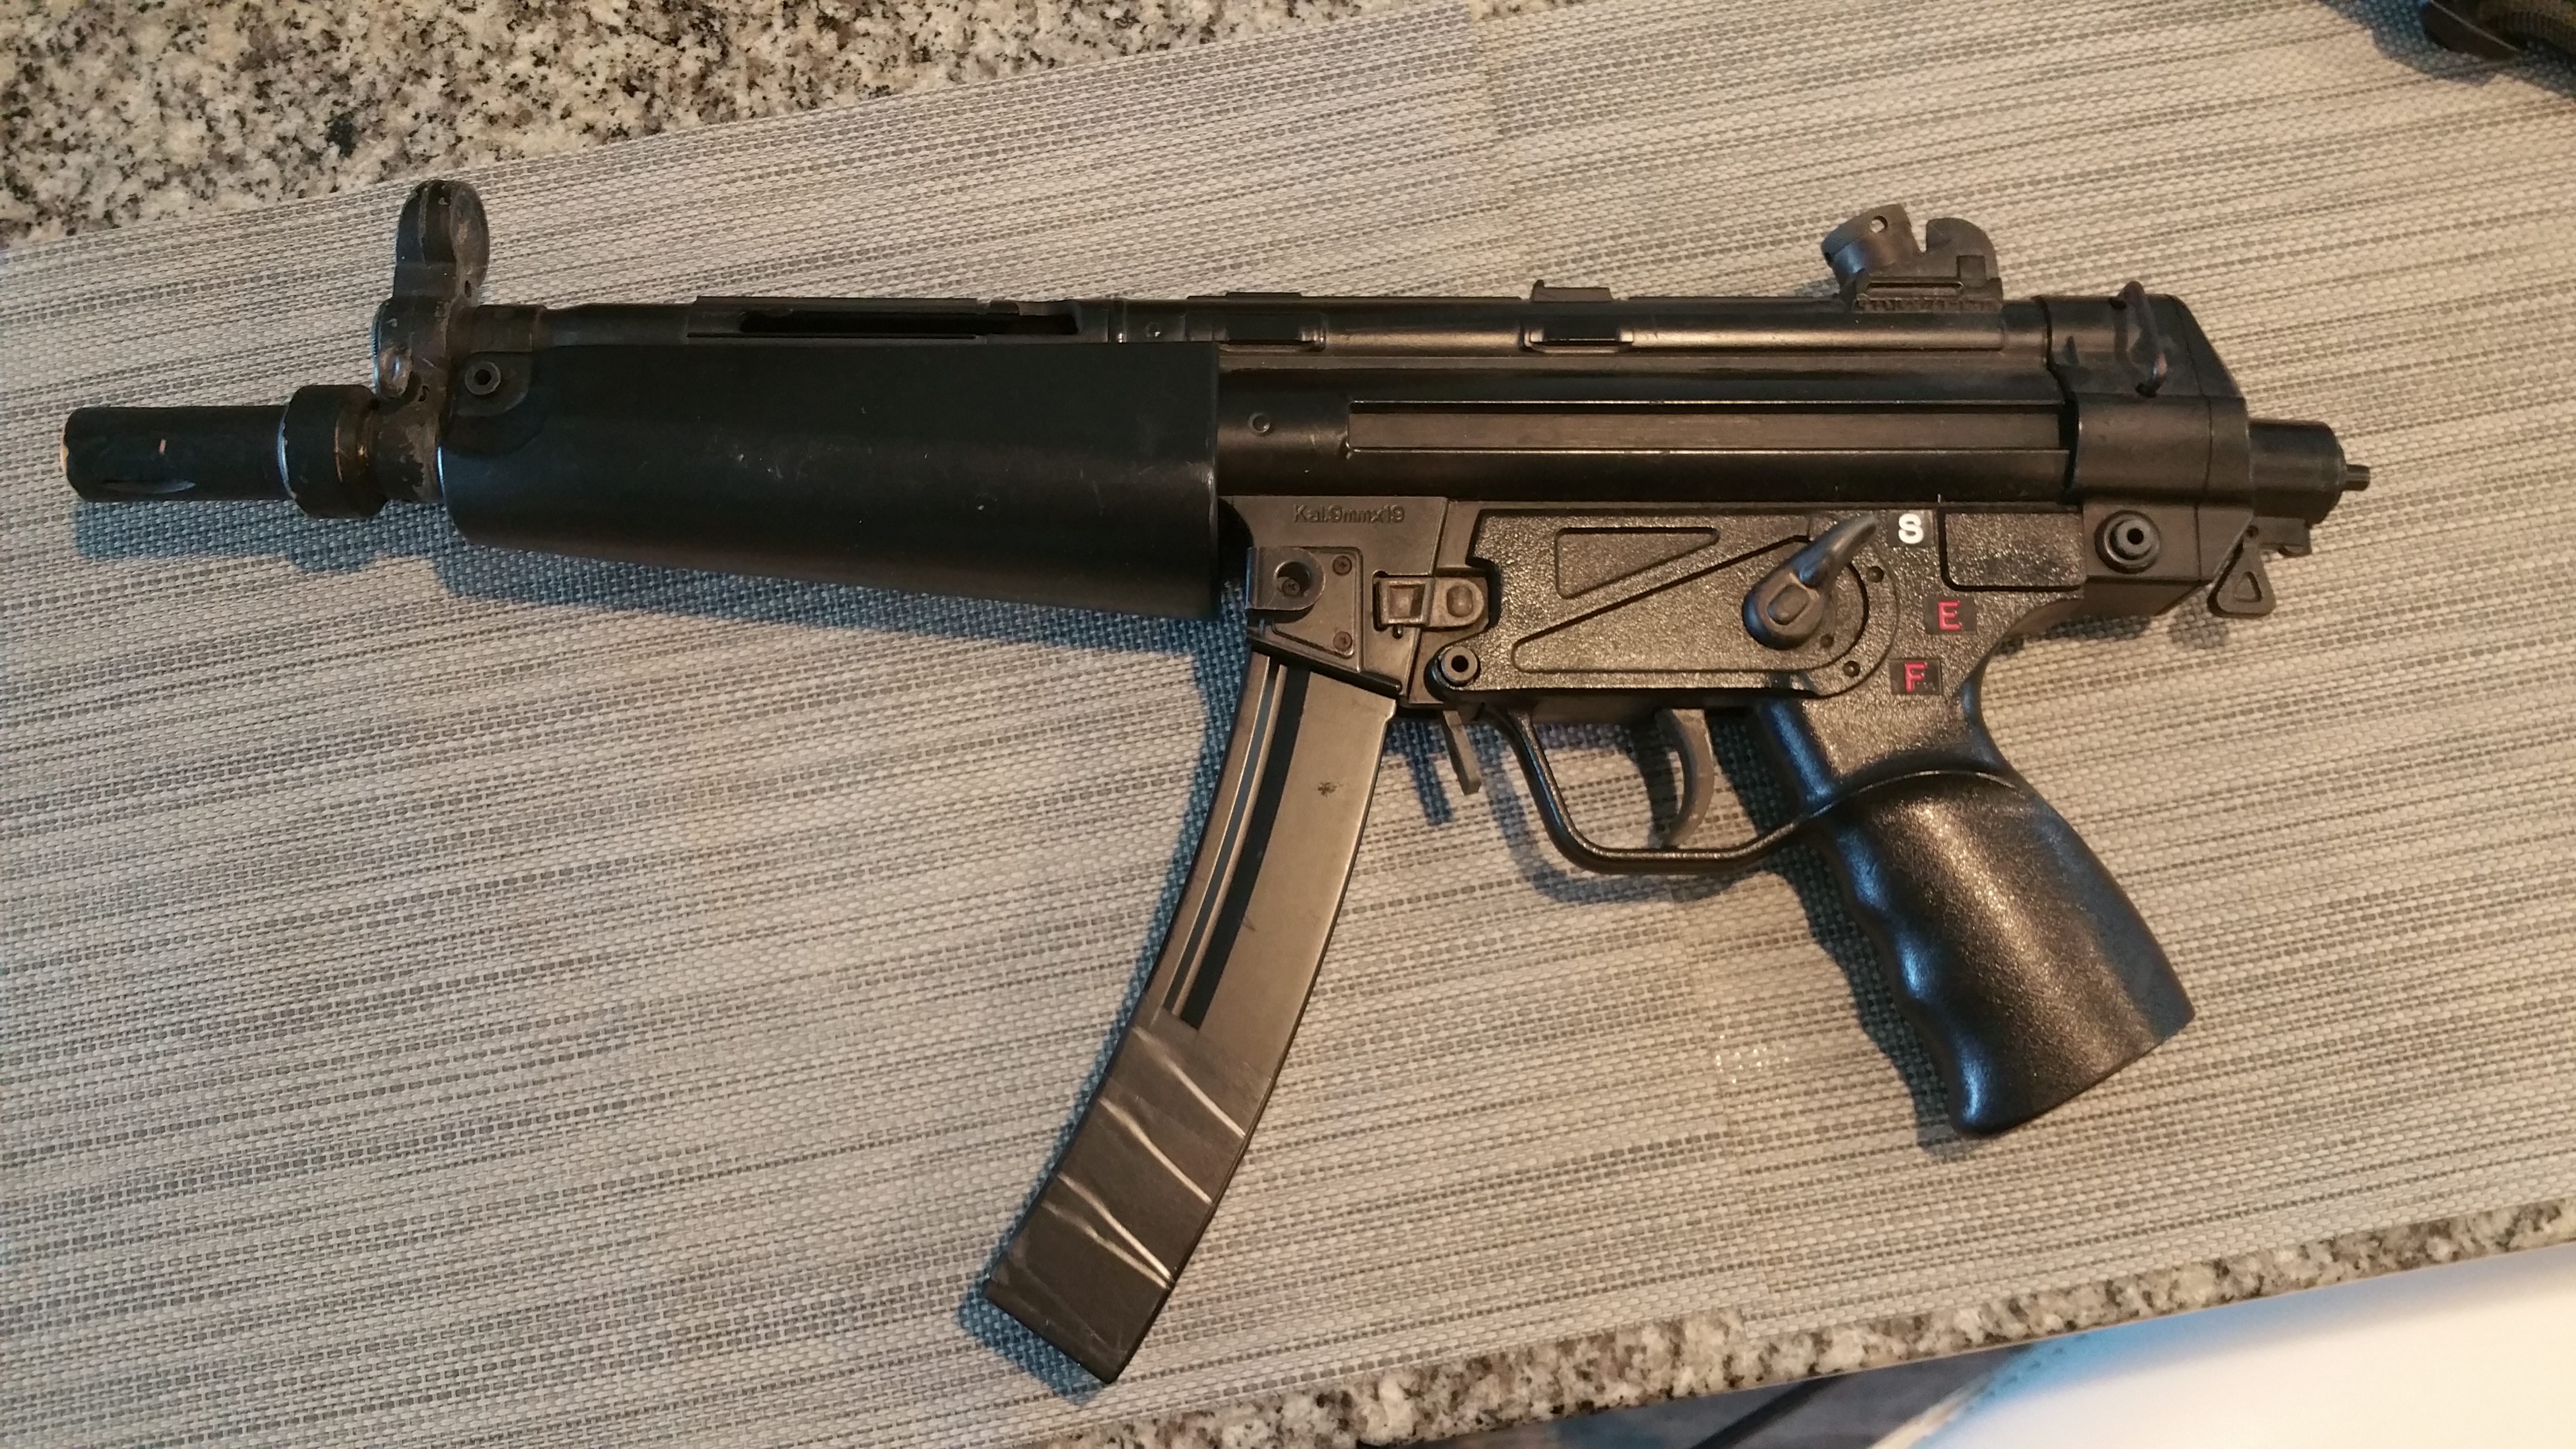 SOLD Rare Classic Army B&T mp5 | HopUp Airsoft